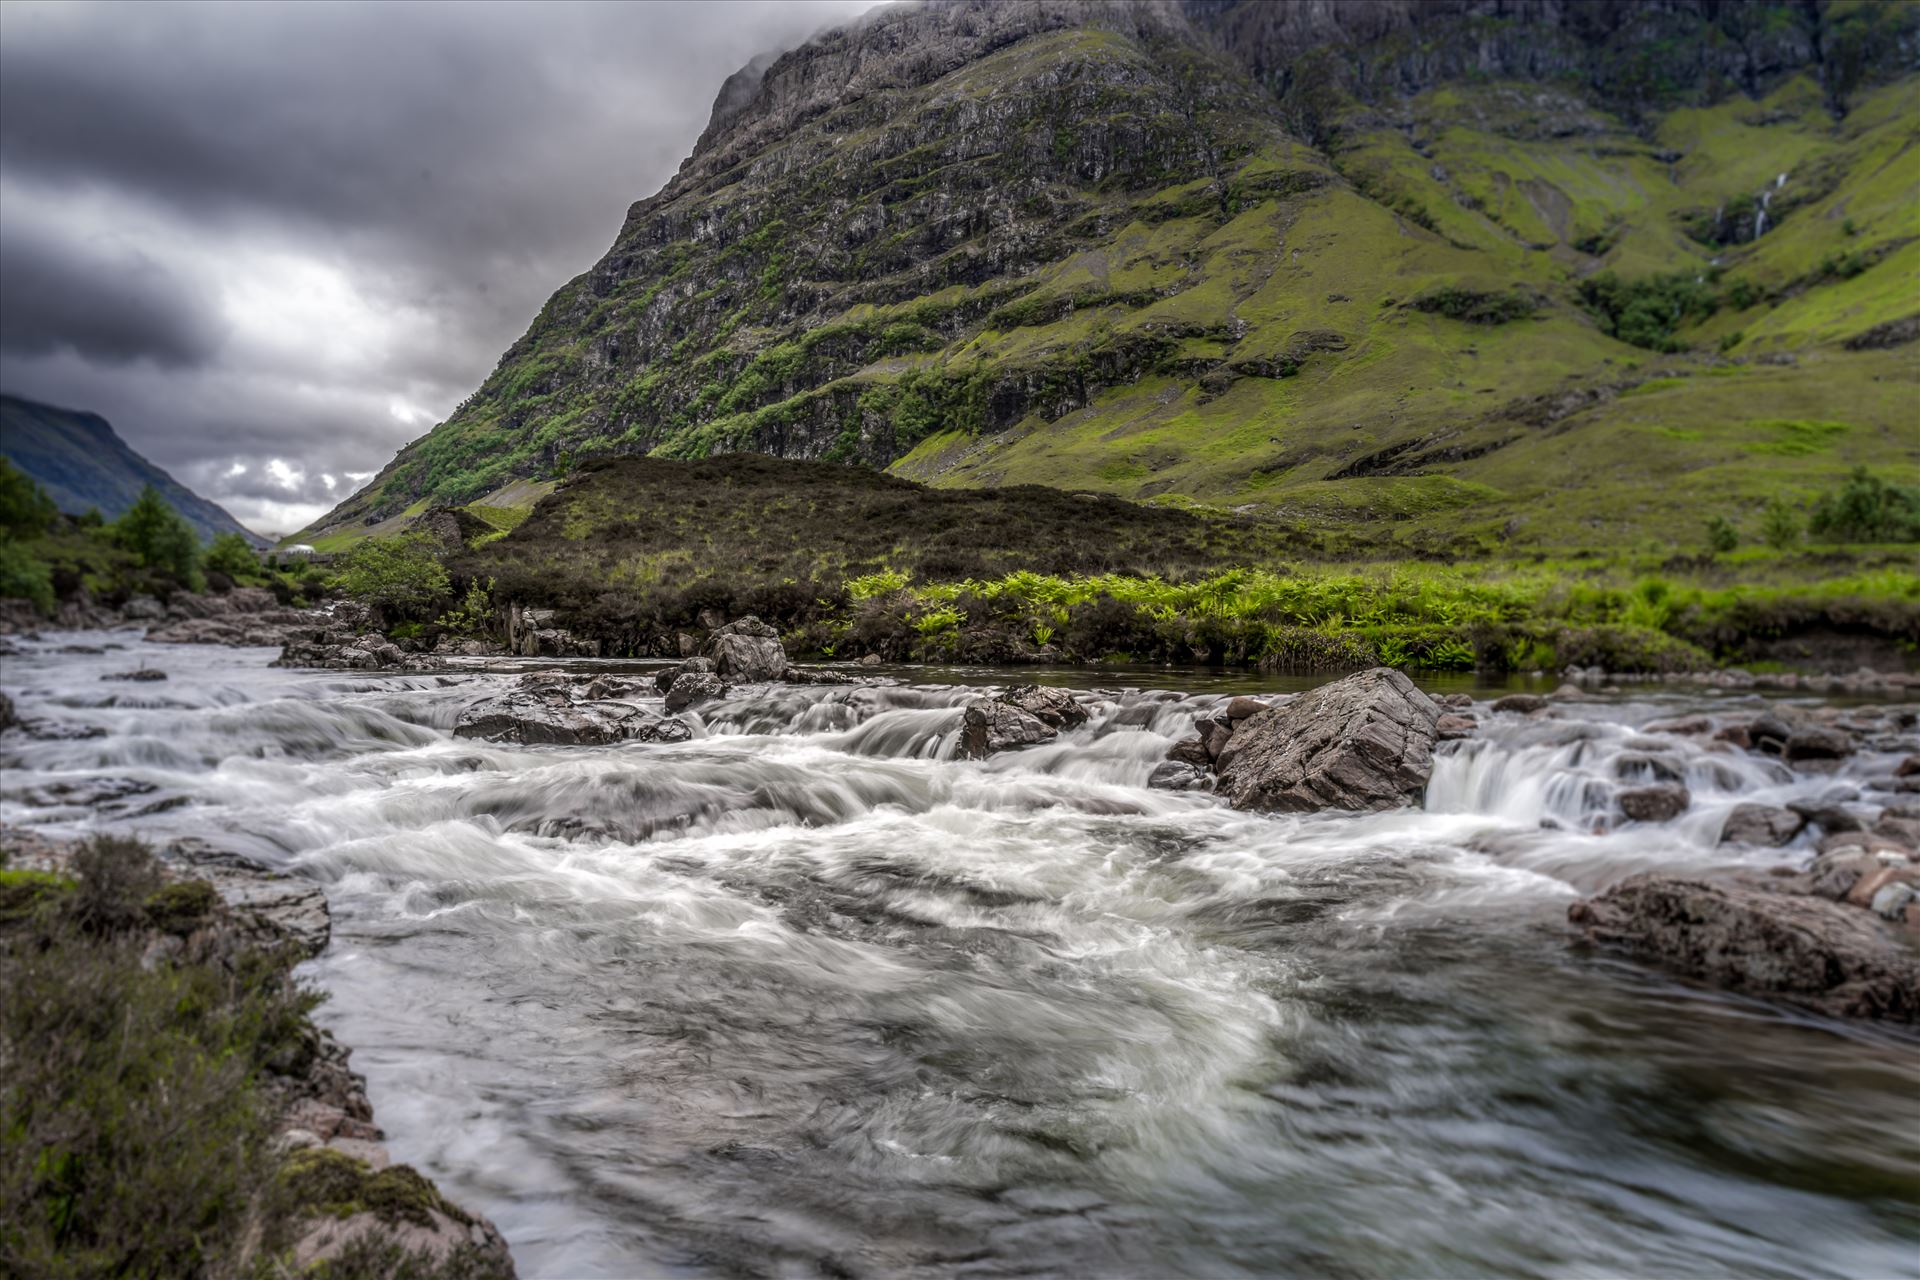 Clanhaig falls - Clanhaig falls are located in the beautiful location of Glencoe in the Scottish Highlands. by philreay